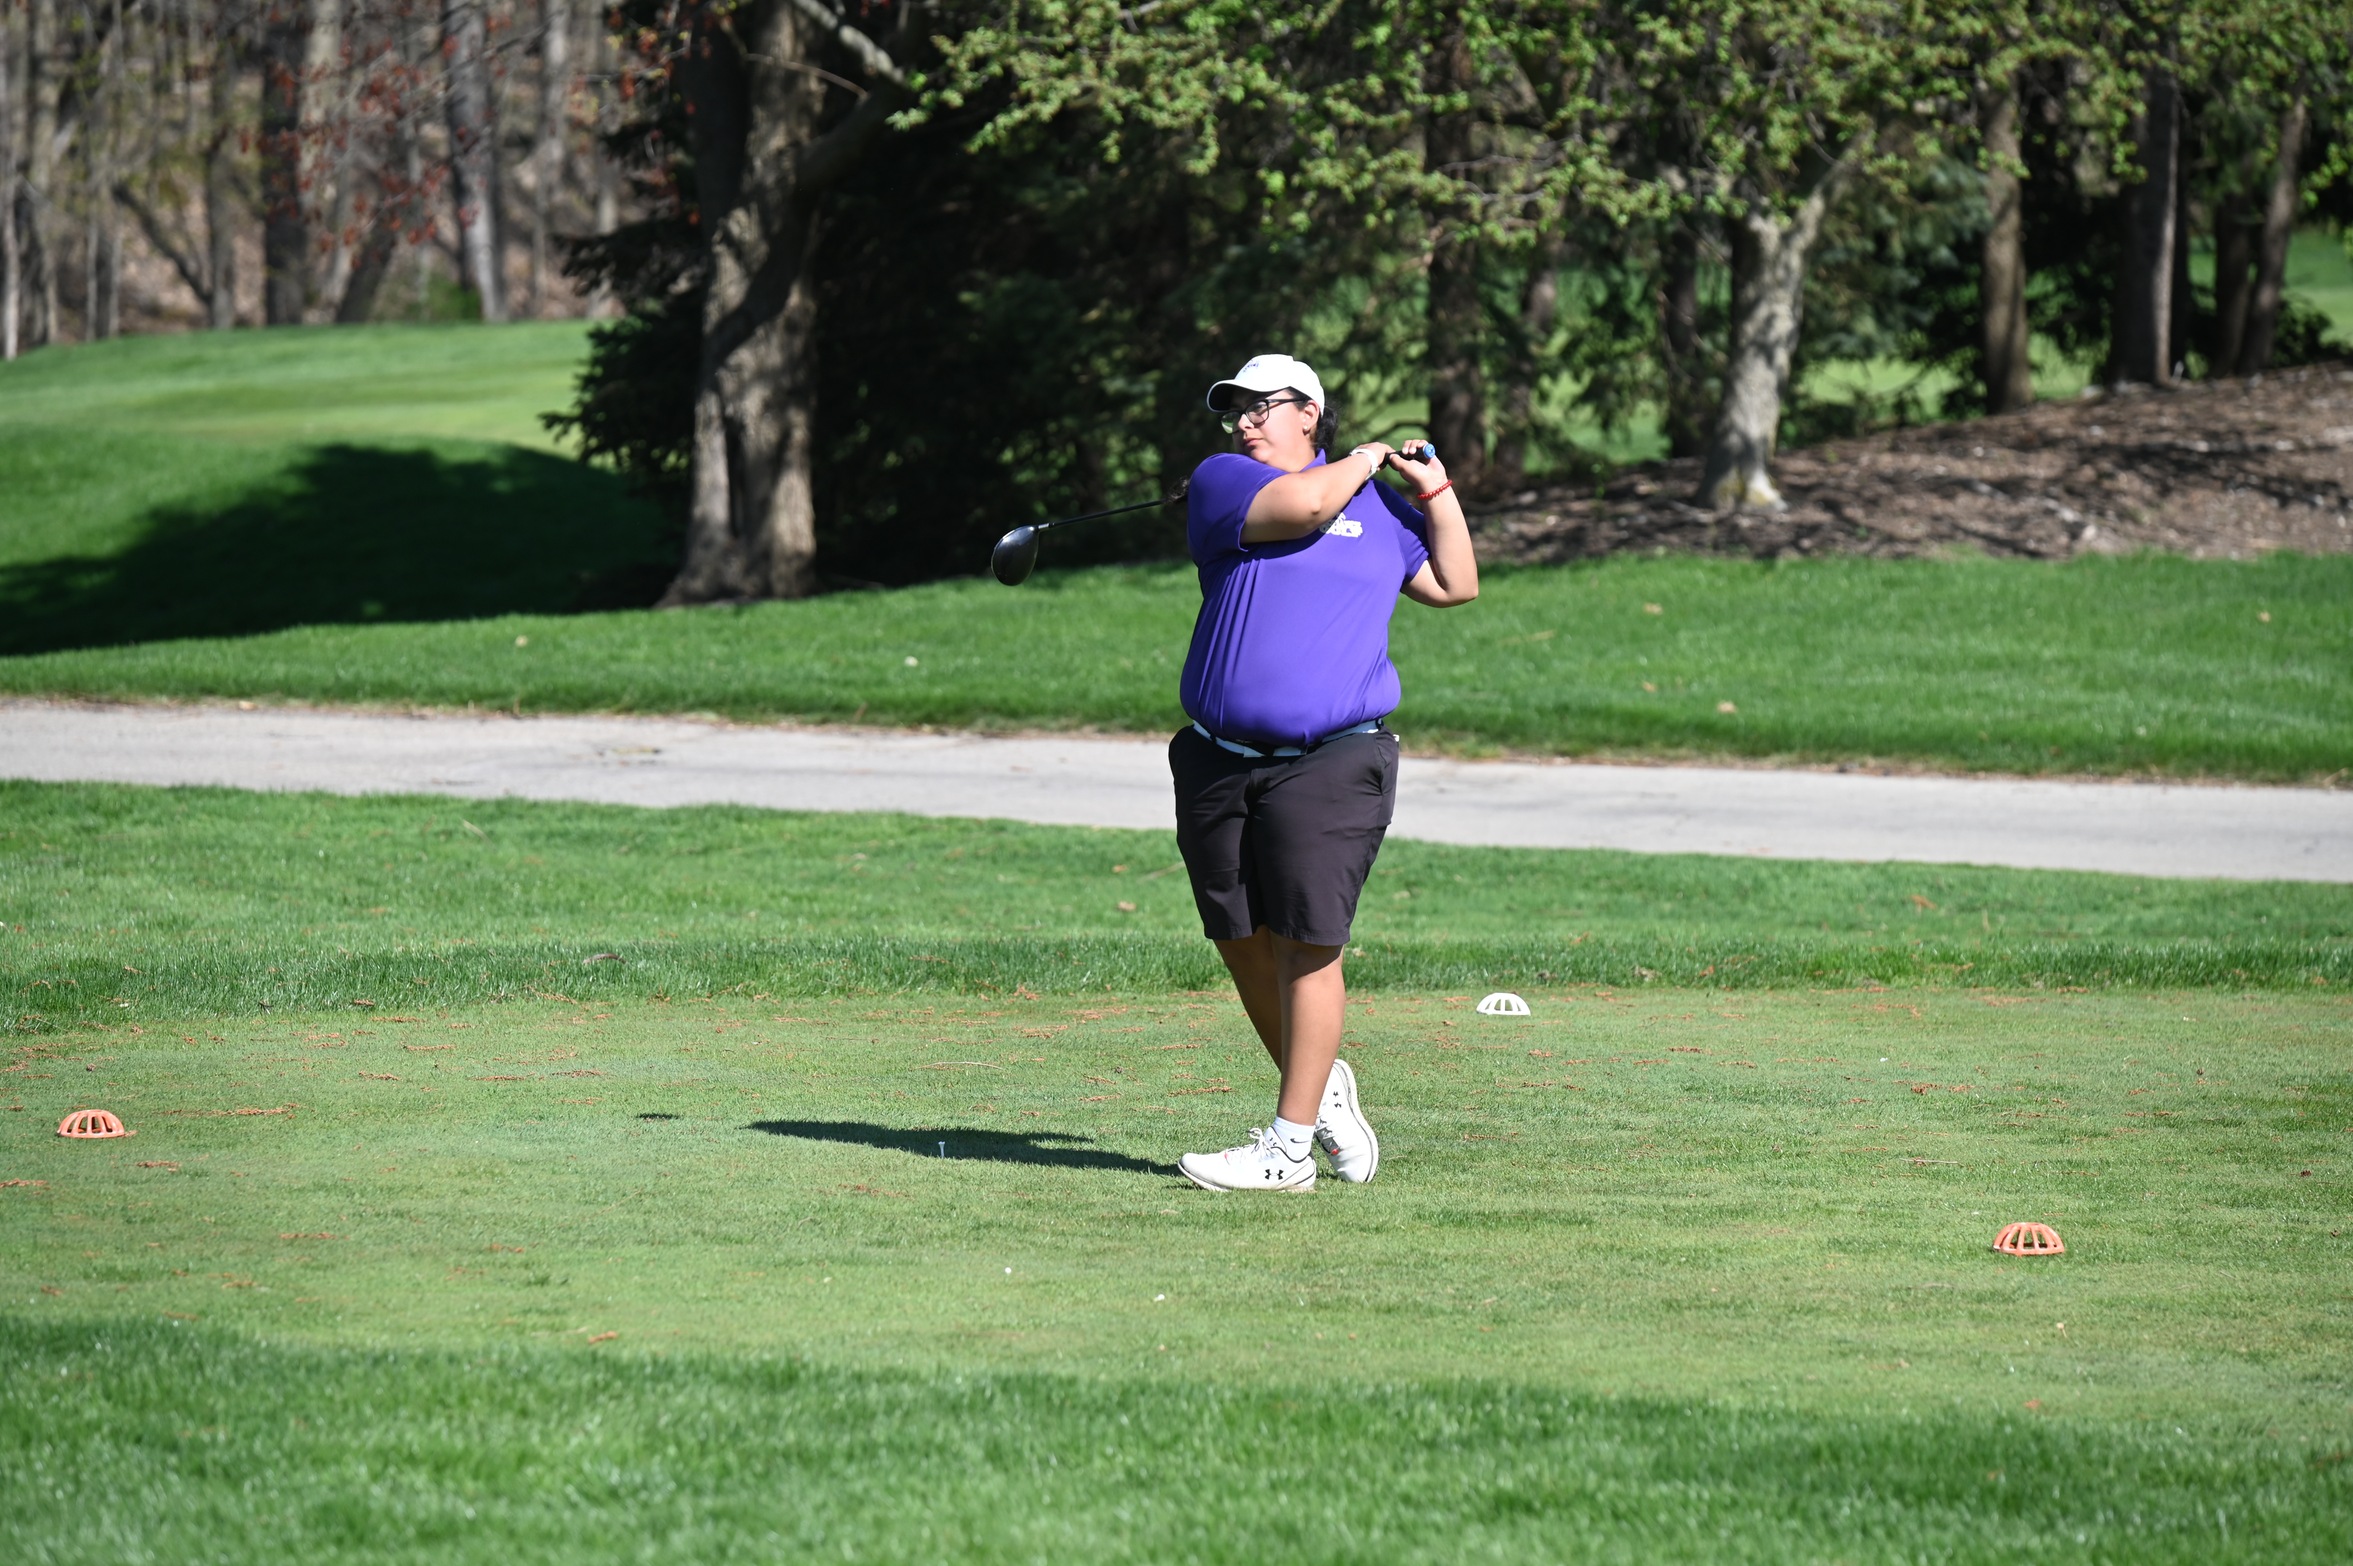 Another strong weekend for women’s golf at Manakiki